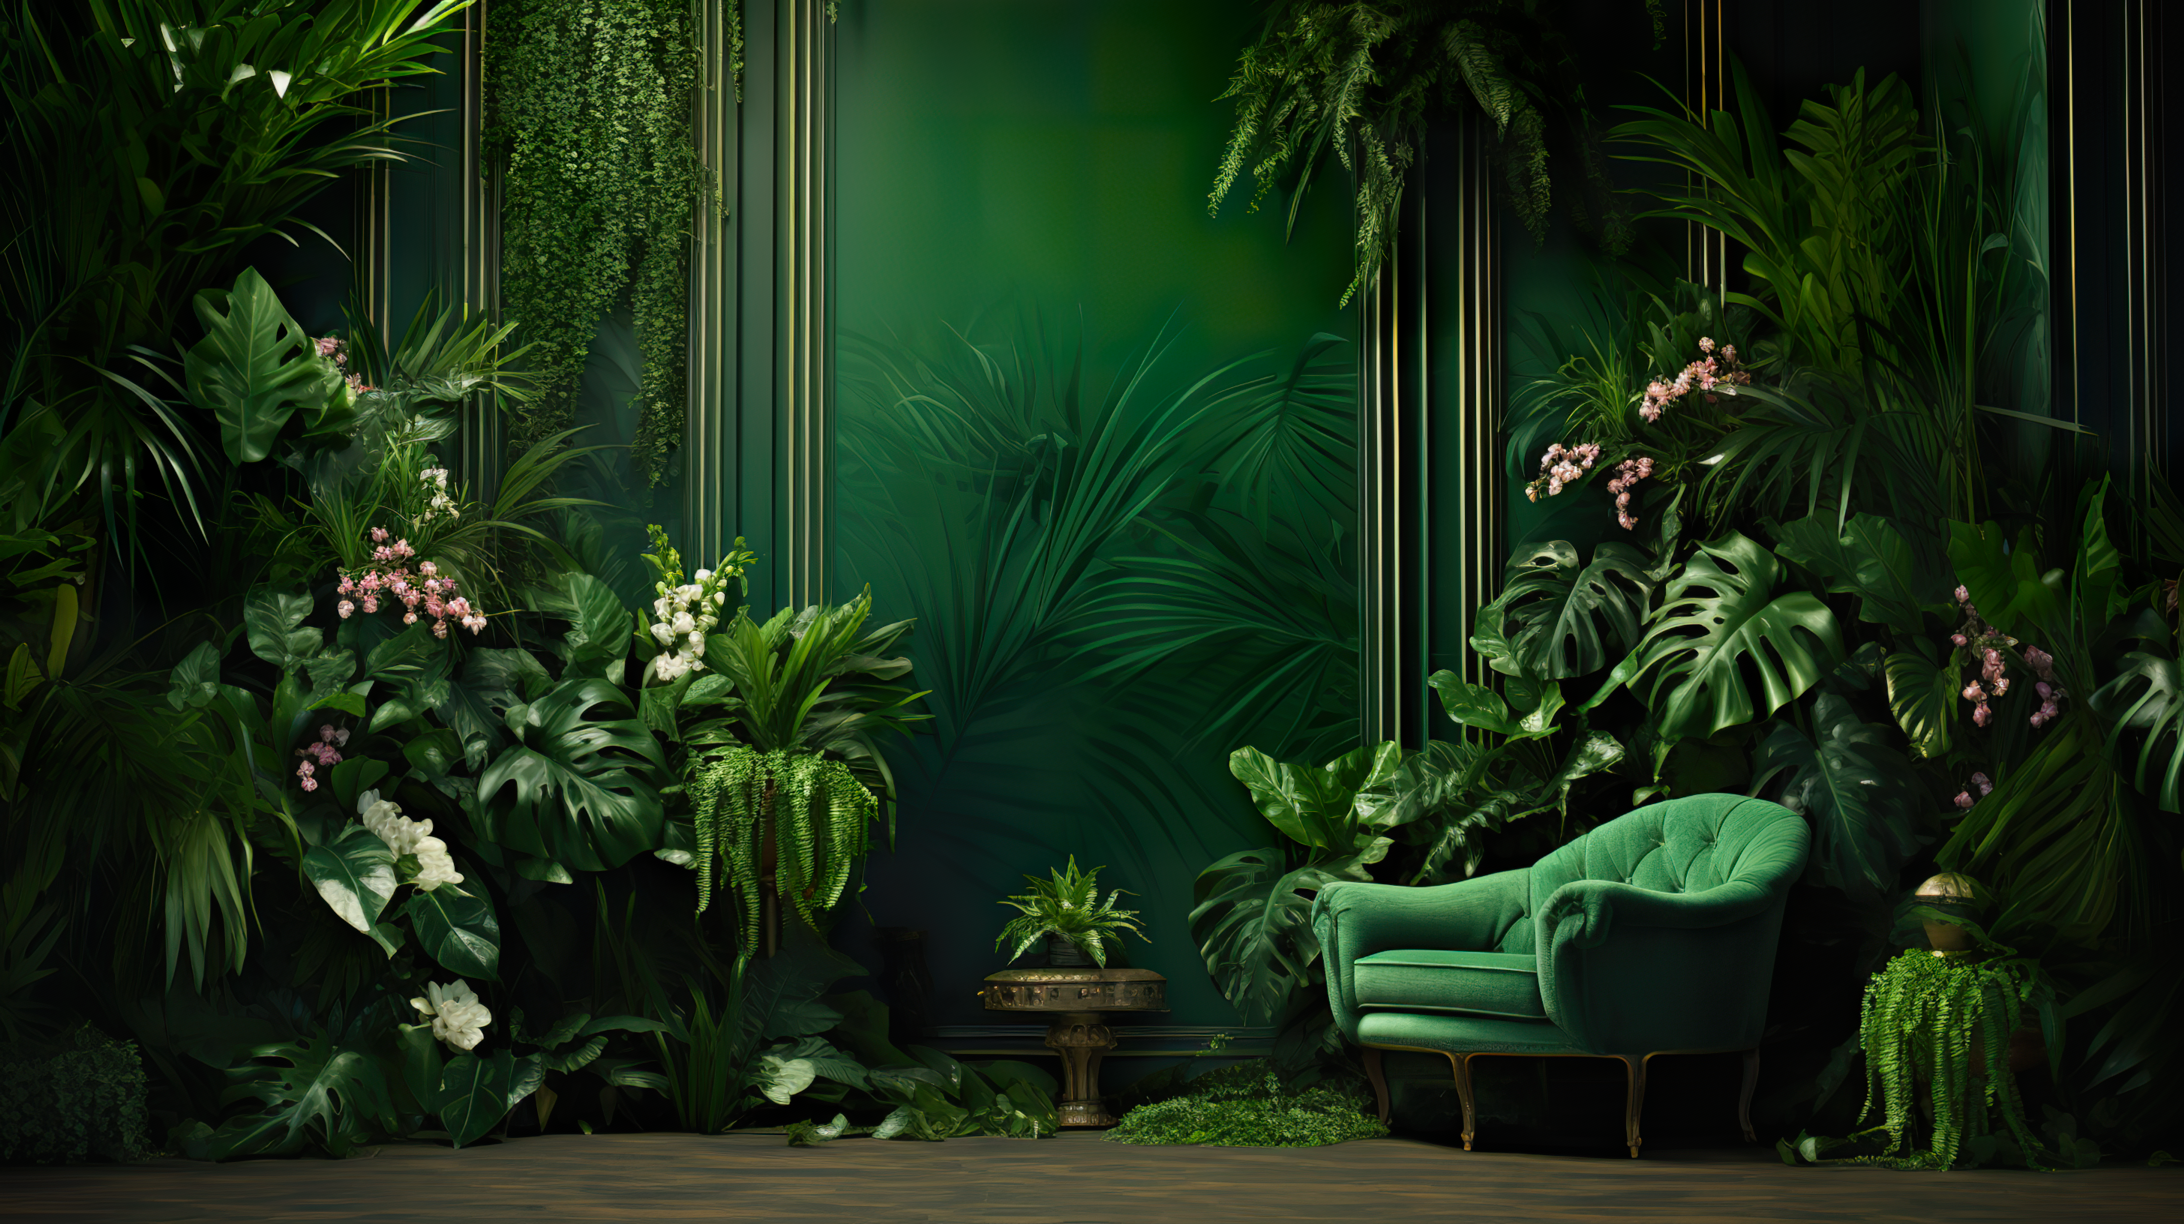 Green aesthetic HD desktop wallpaper featuring a serene room with lush indoor plants and a cozy green armchair, perfect for a tranquil background.